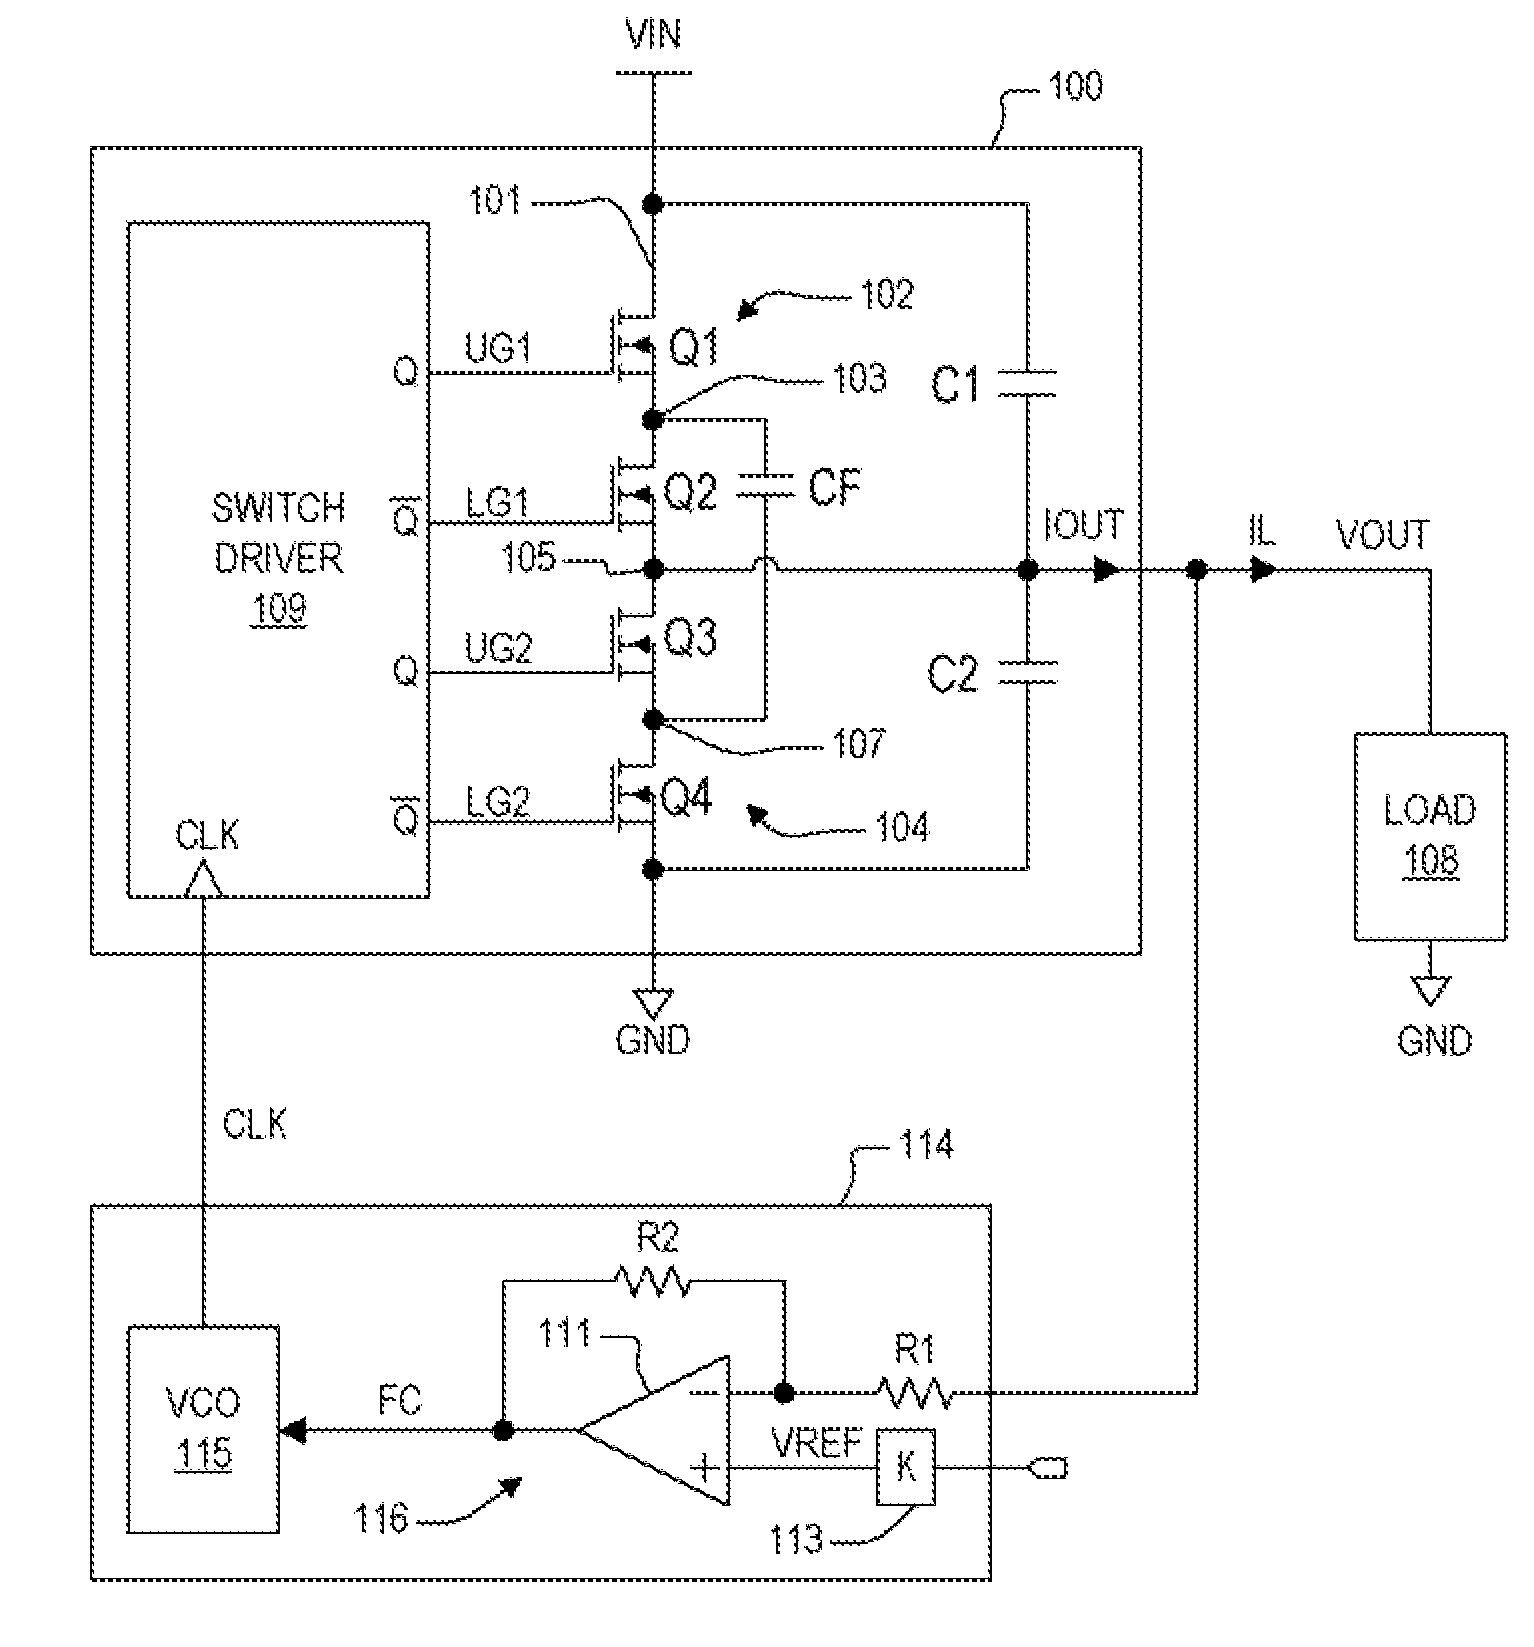 Switching frequency control of switched capacitor circuit using output voltage droop